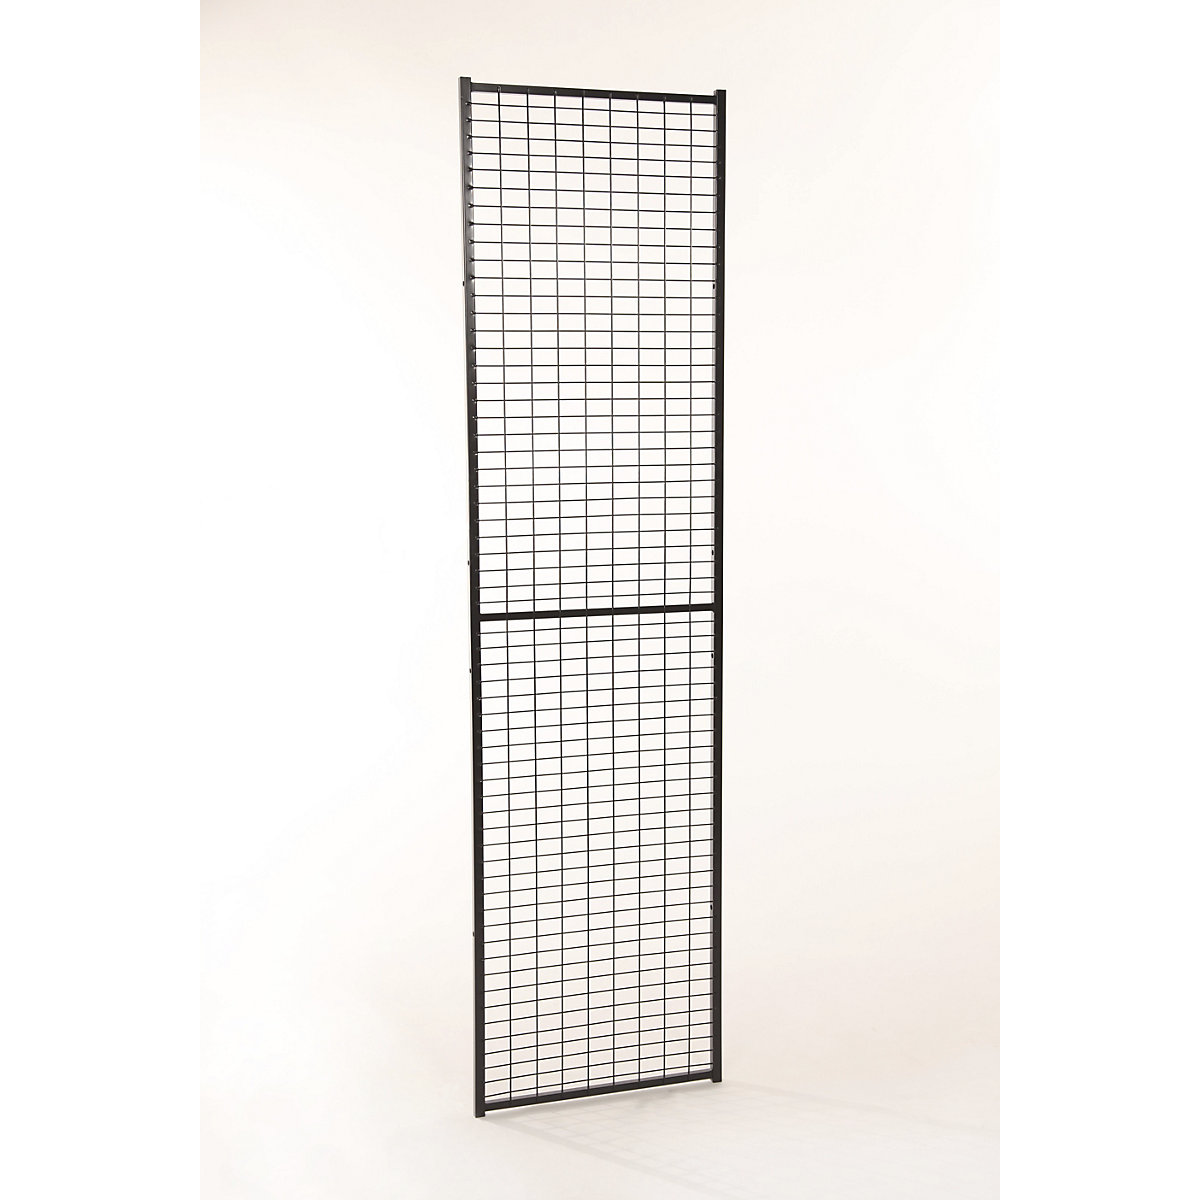 X-GUARD LITE machine protective fencing, wall section – Axelent, height 2200 mm, width 400 mm-9